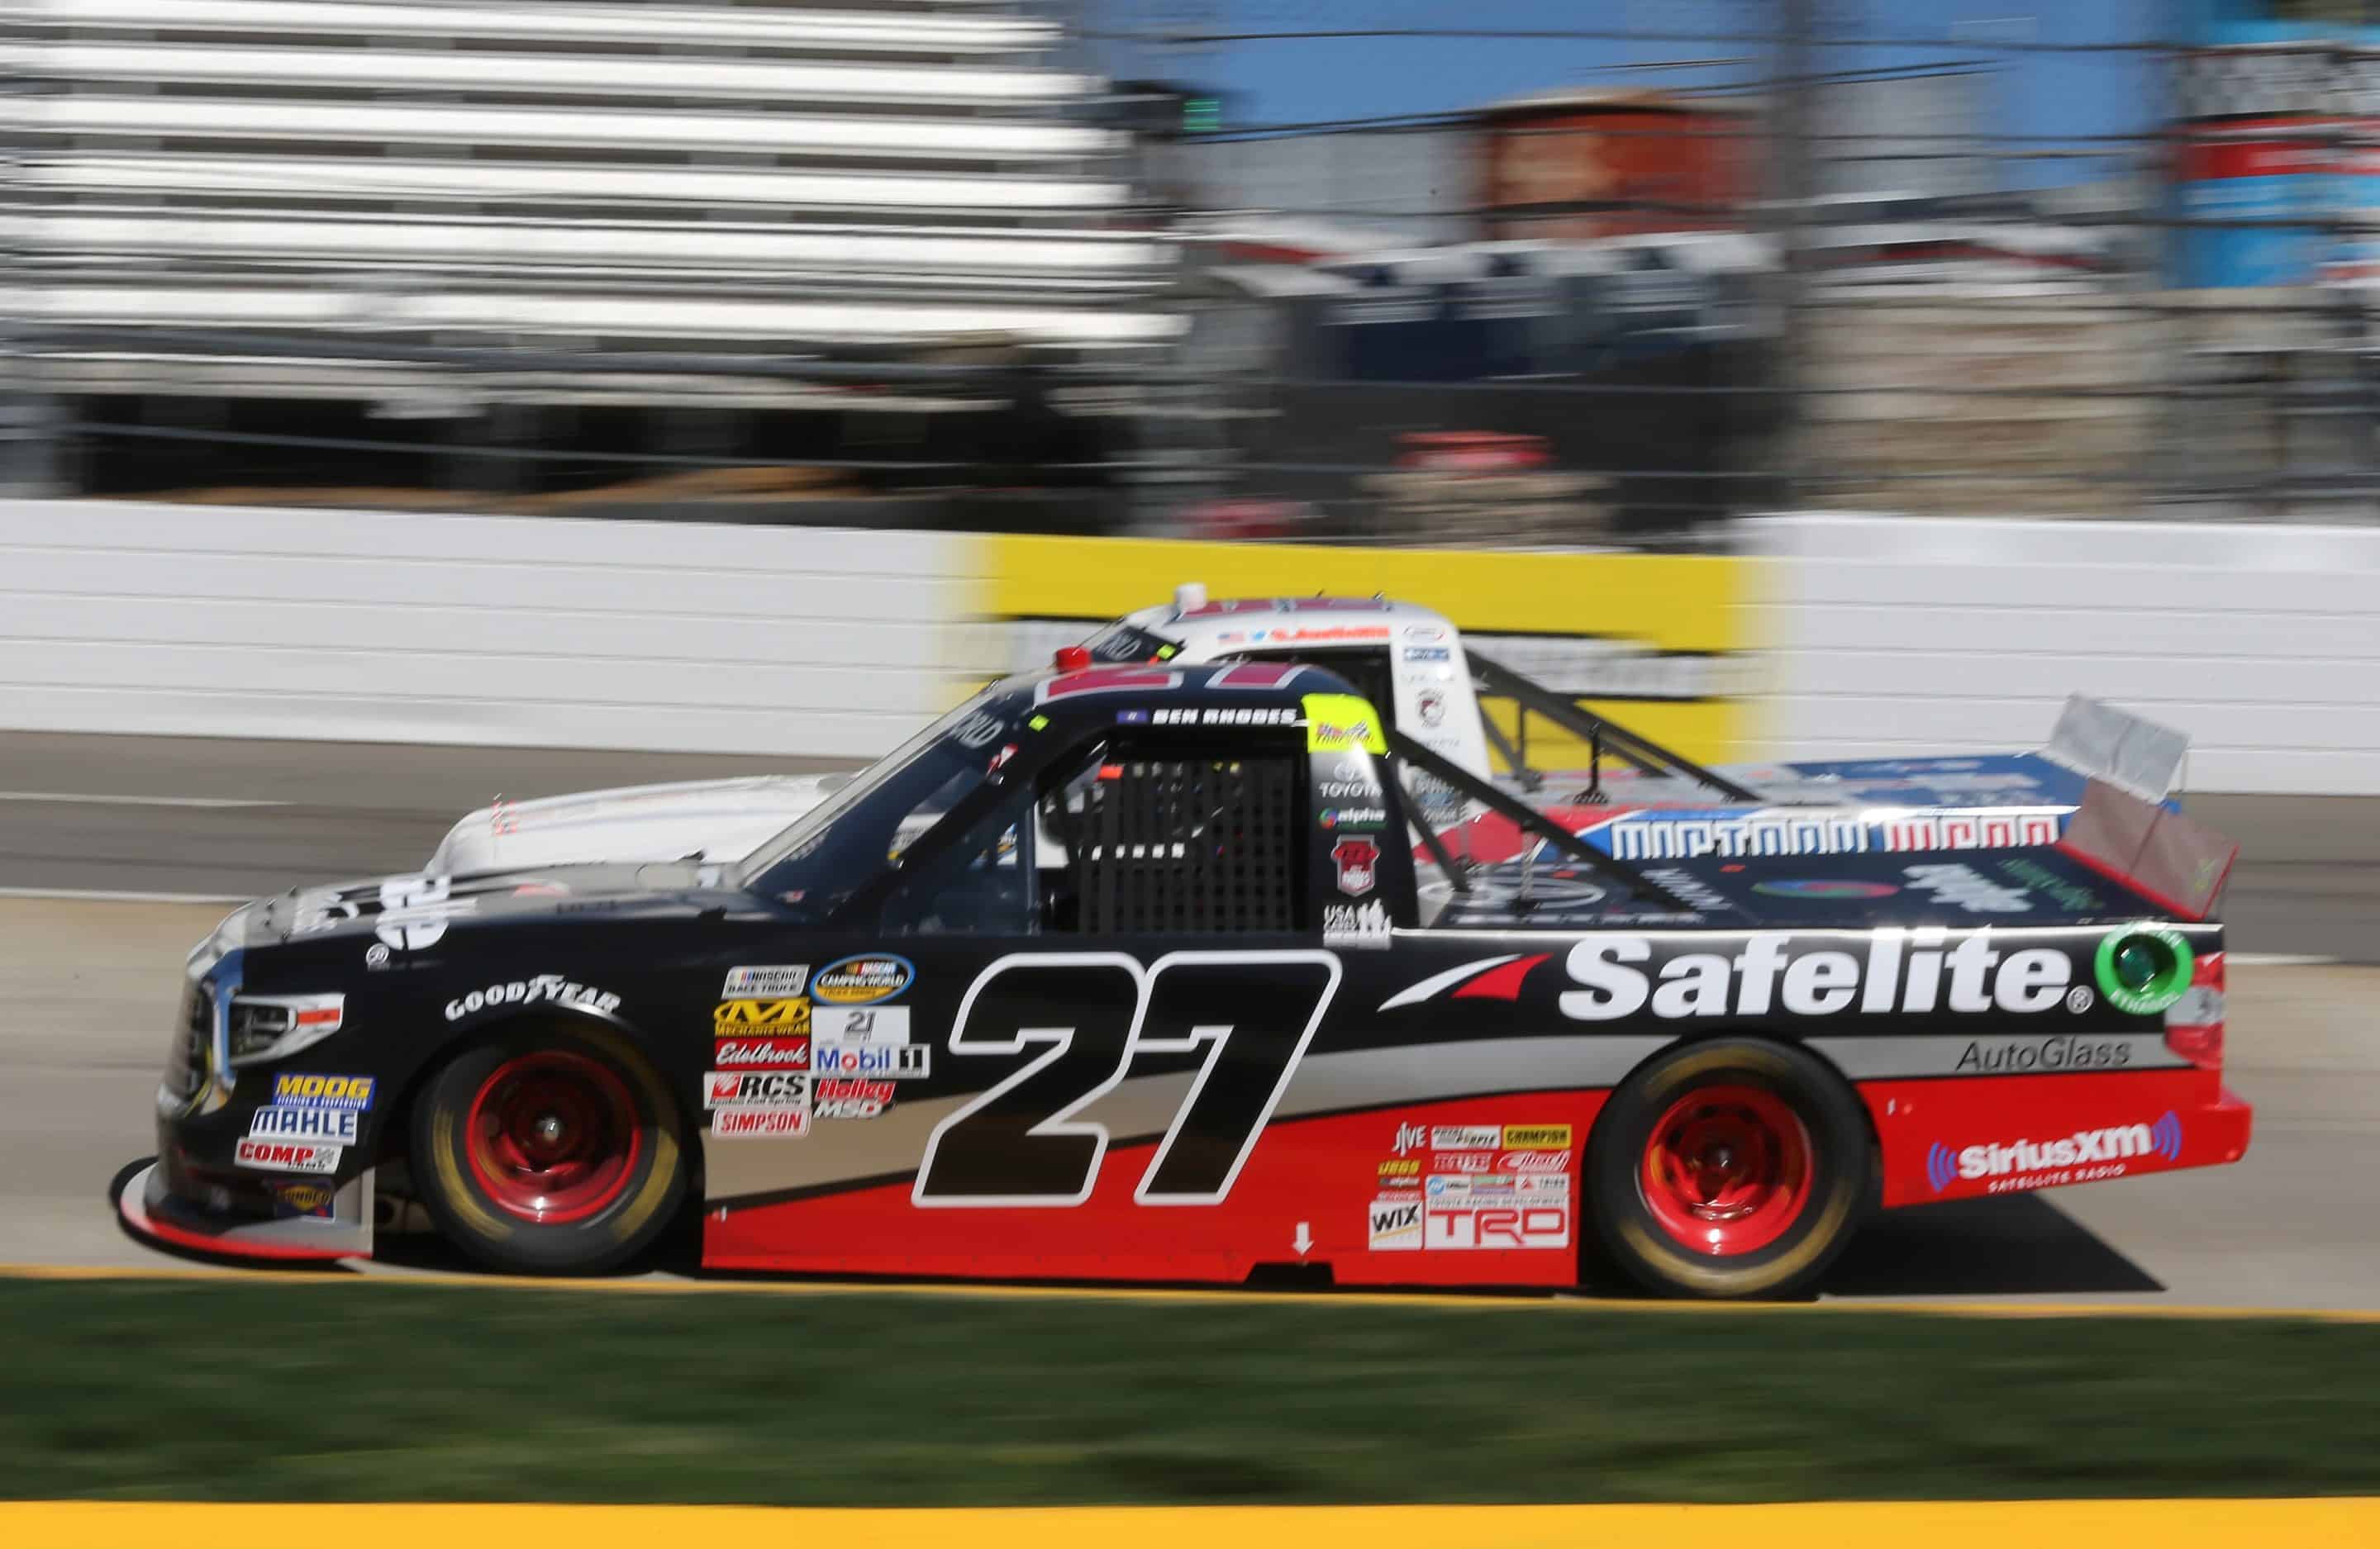 MARTINSVILLE, VA - APRIL 01: Ben Rhodes, driver of the #27 Safelite Auto Glass Toyota, races during the NASCAR Camping World Truck Series Alpha Energy Solutions 250 at Martinsville Speedway on April 1, 2017 in Martinsville, Virginia.  (Photo by Jerry Markland/Getty Images)